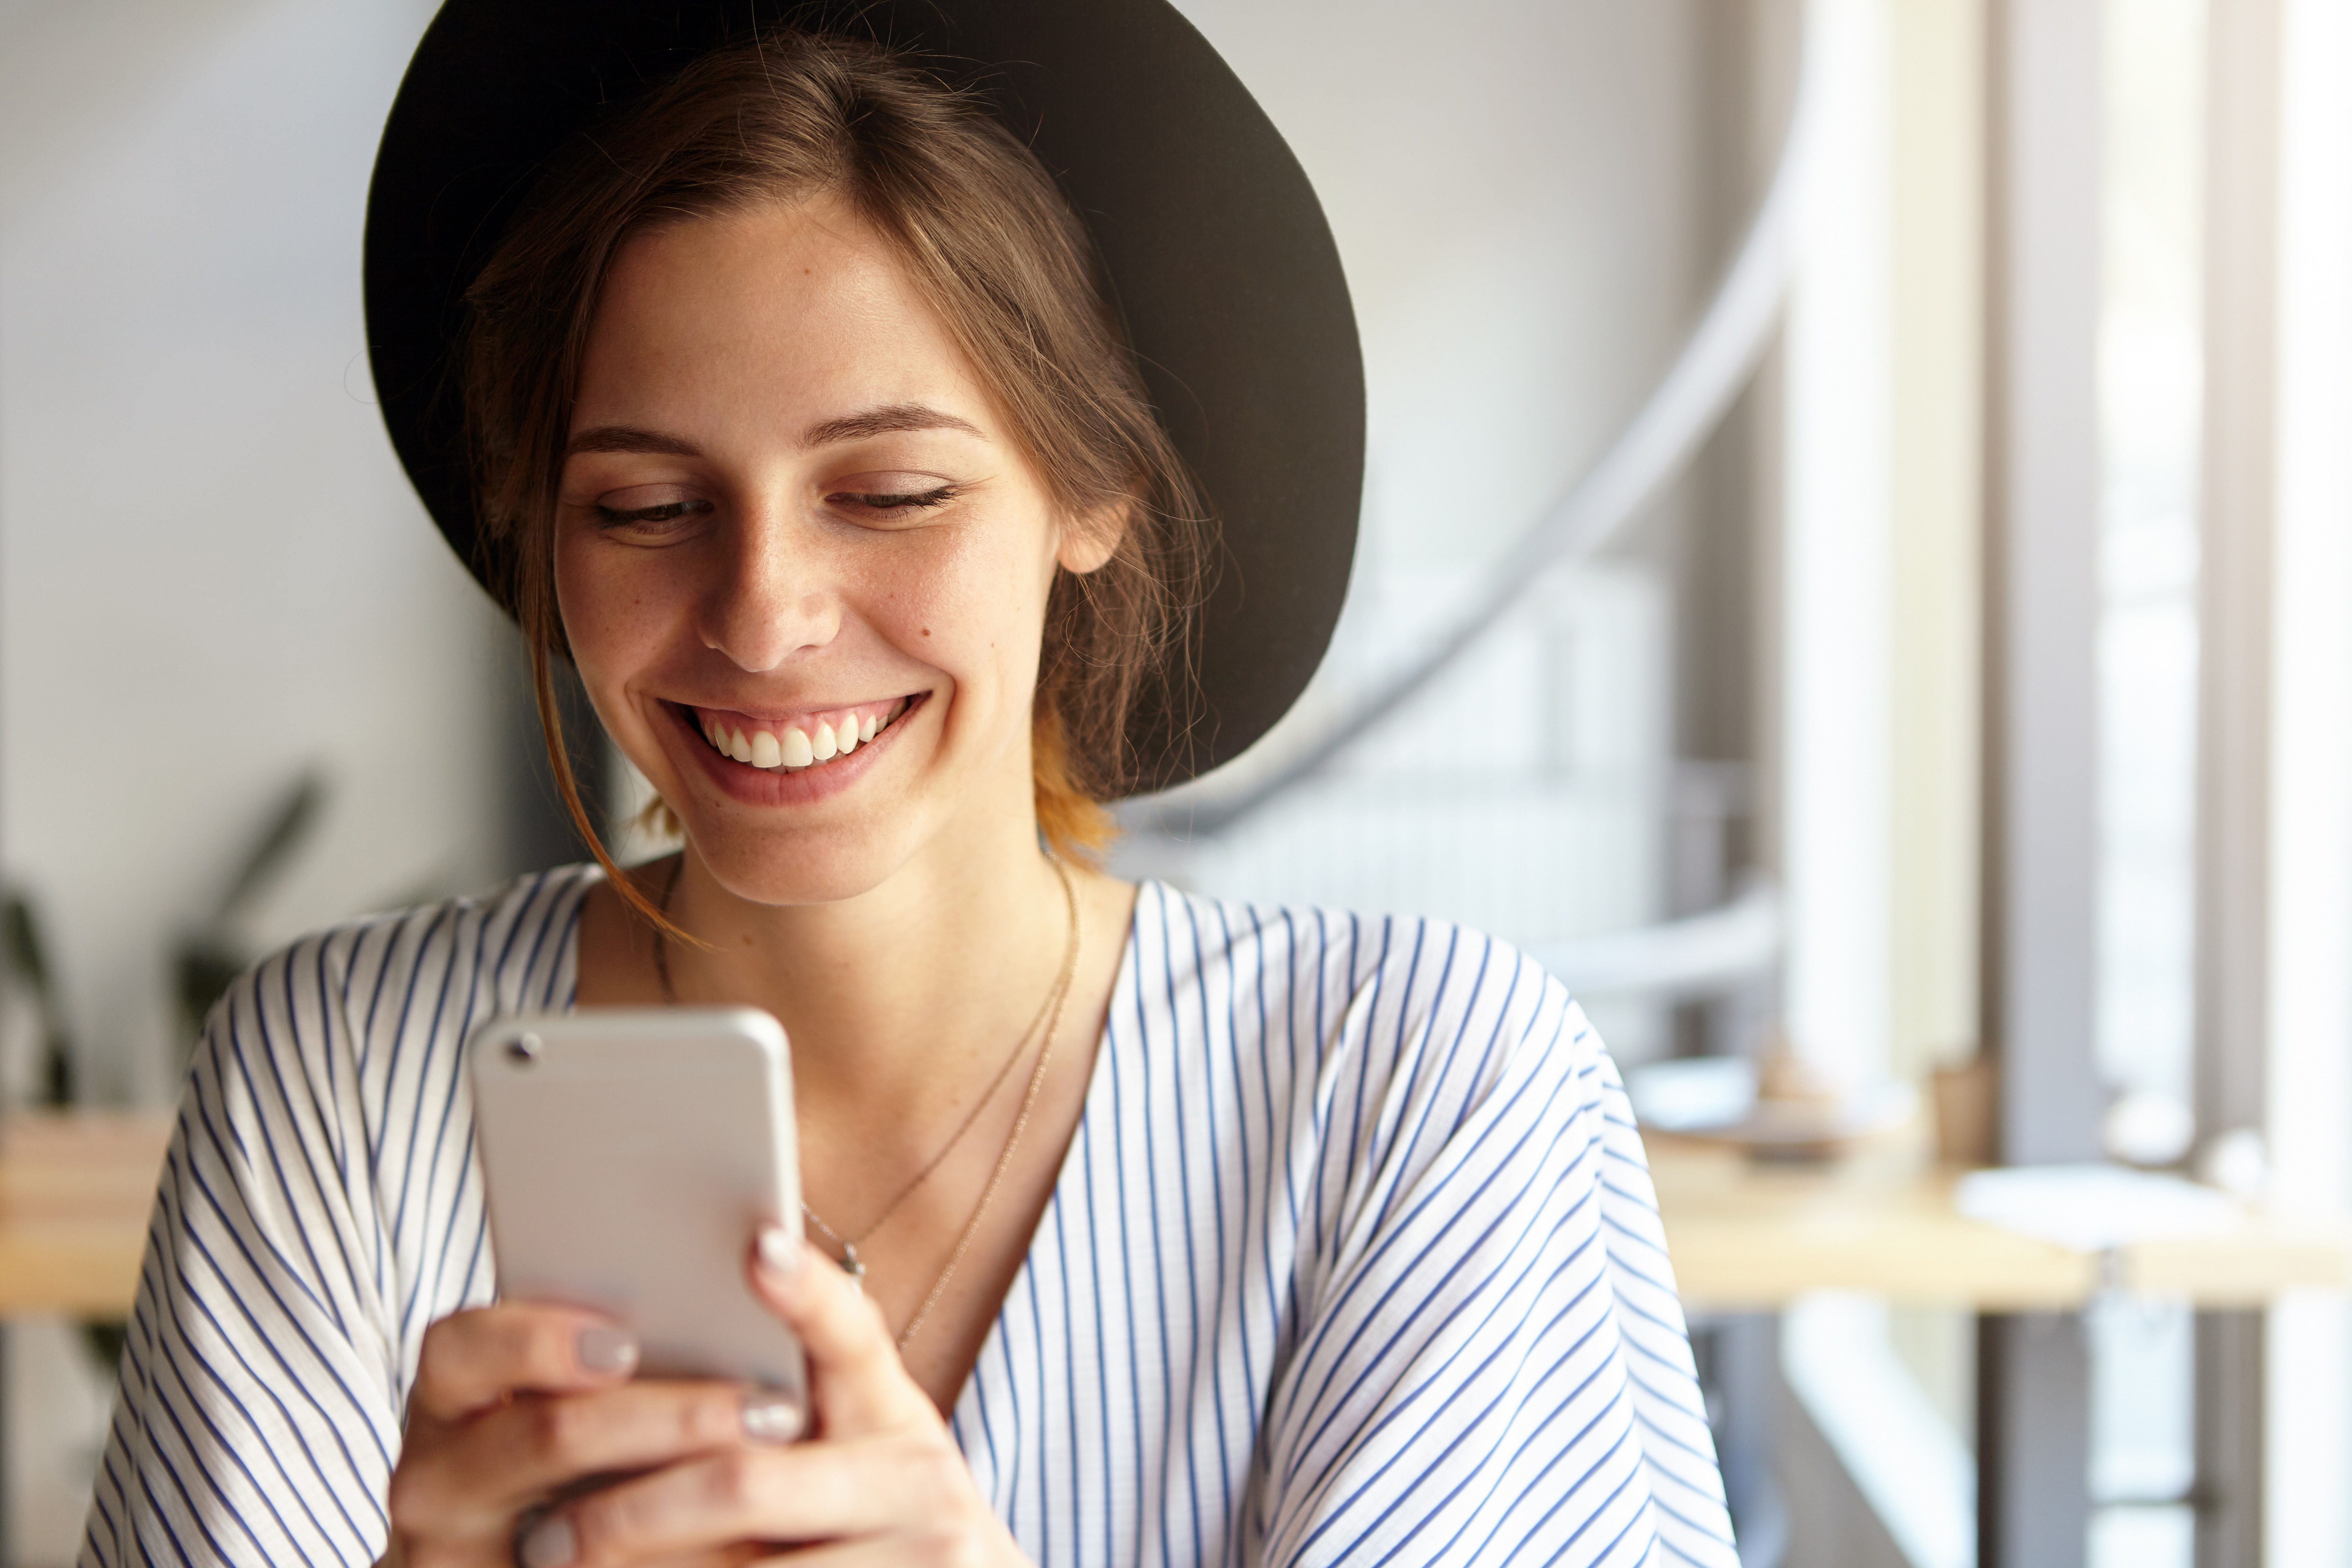 Young woman smiling and looking at a smartphone